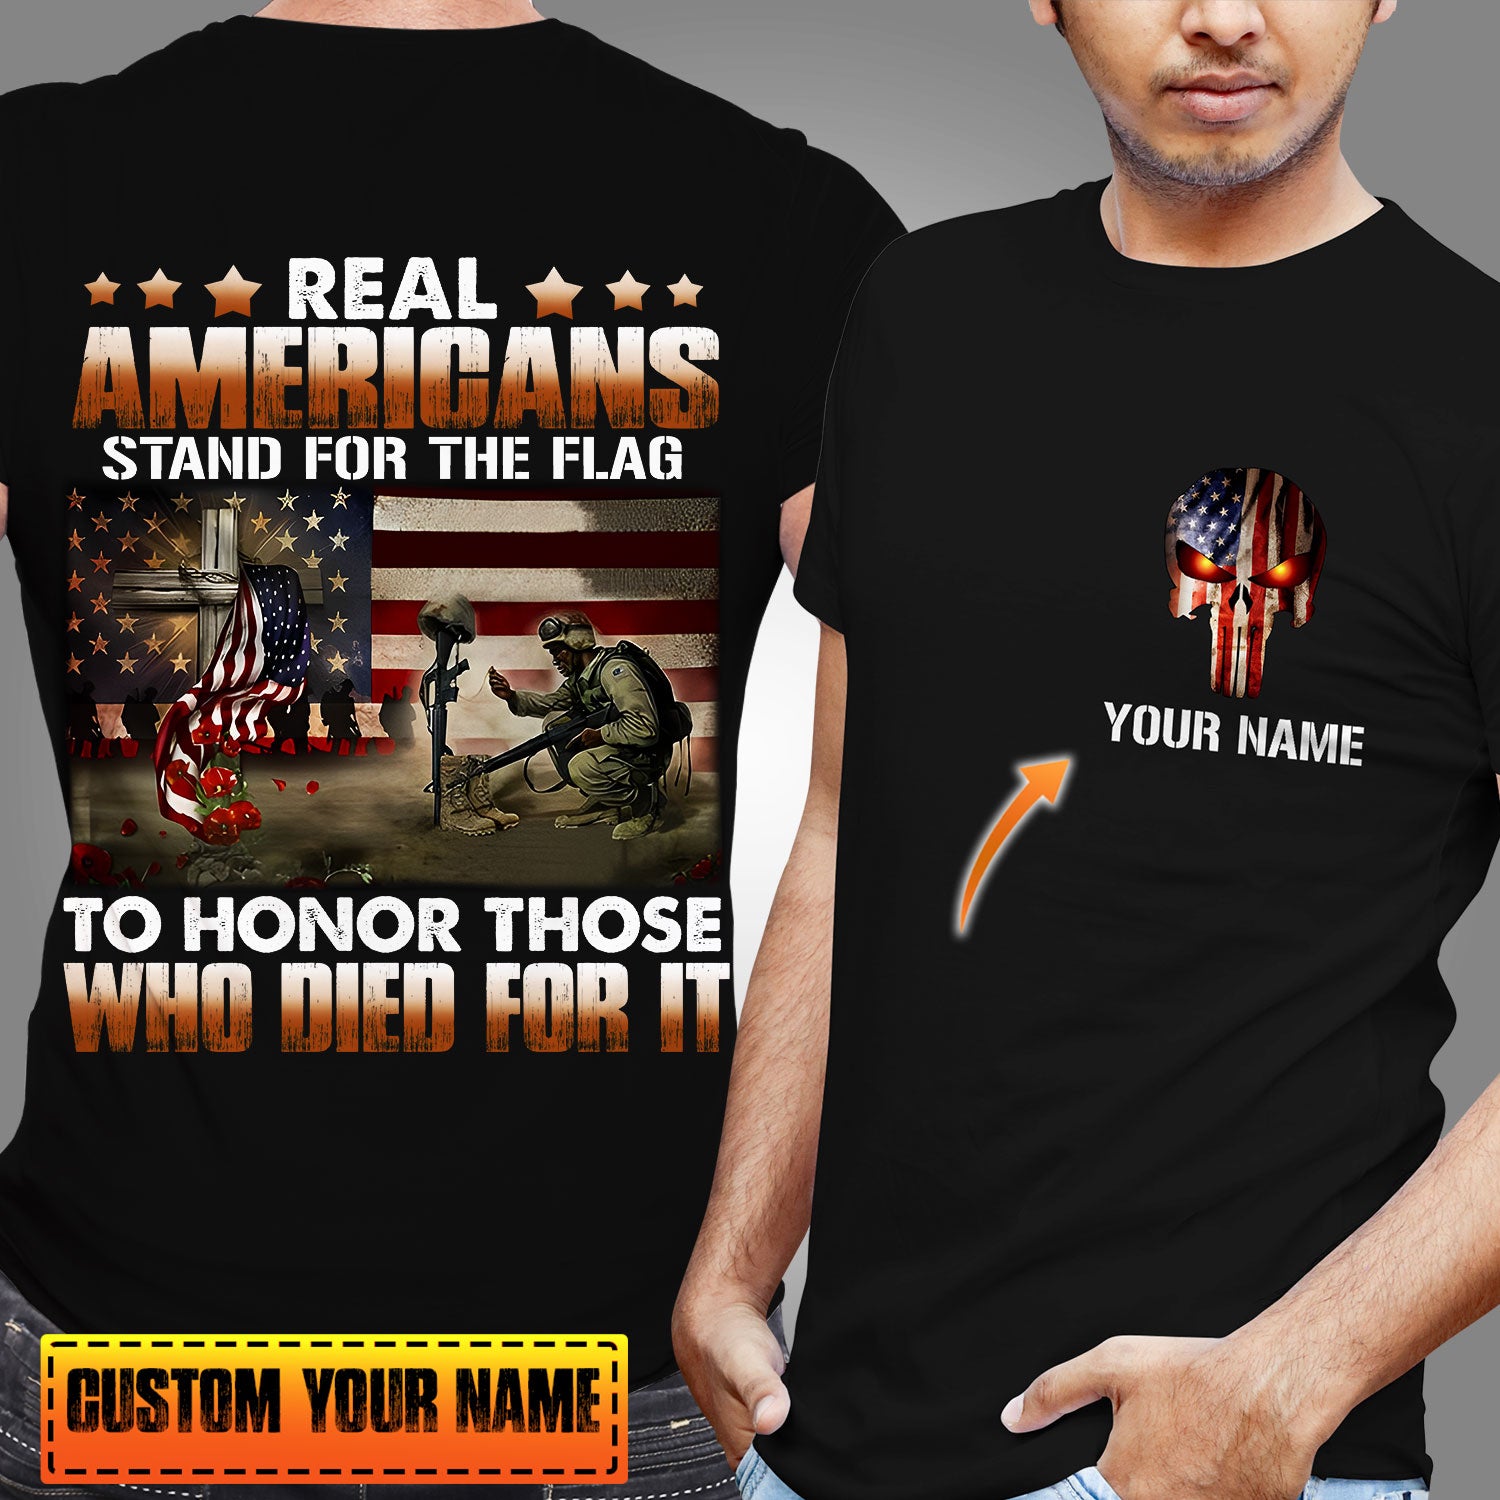 Real Americans Stand For The Flag To Honor Those Who Died For It - Personalized Veteran Army T-Shirt, Gift For Veterans